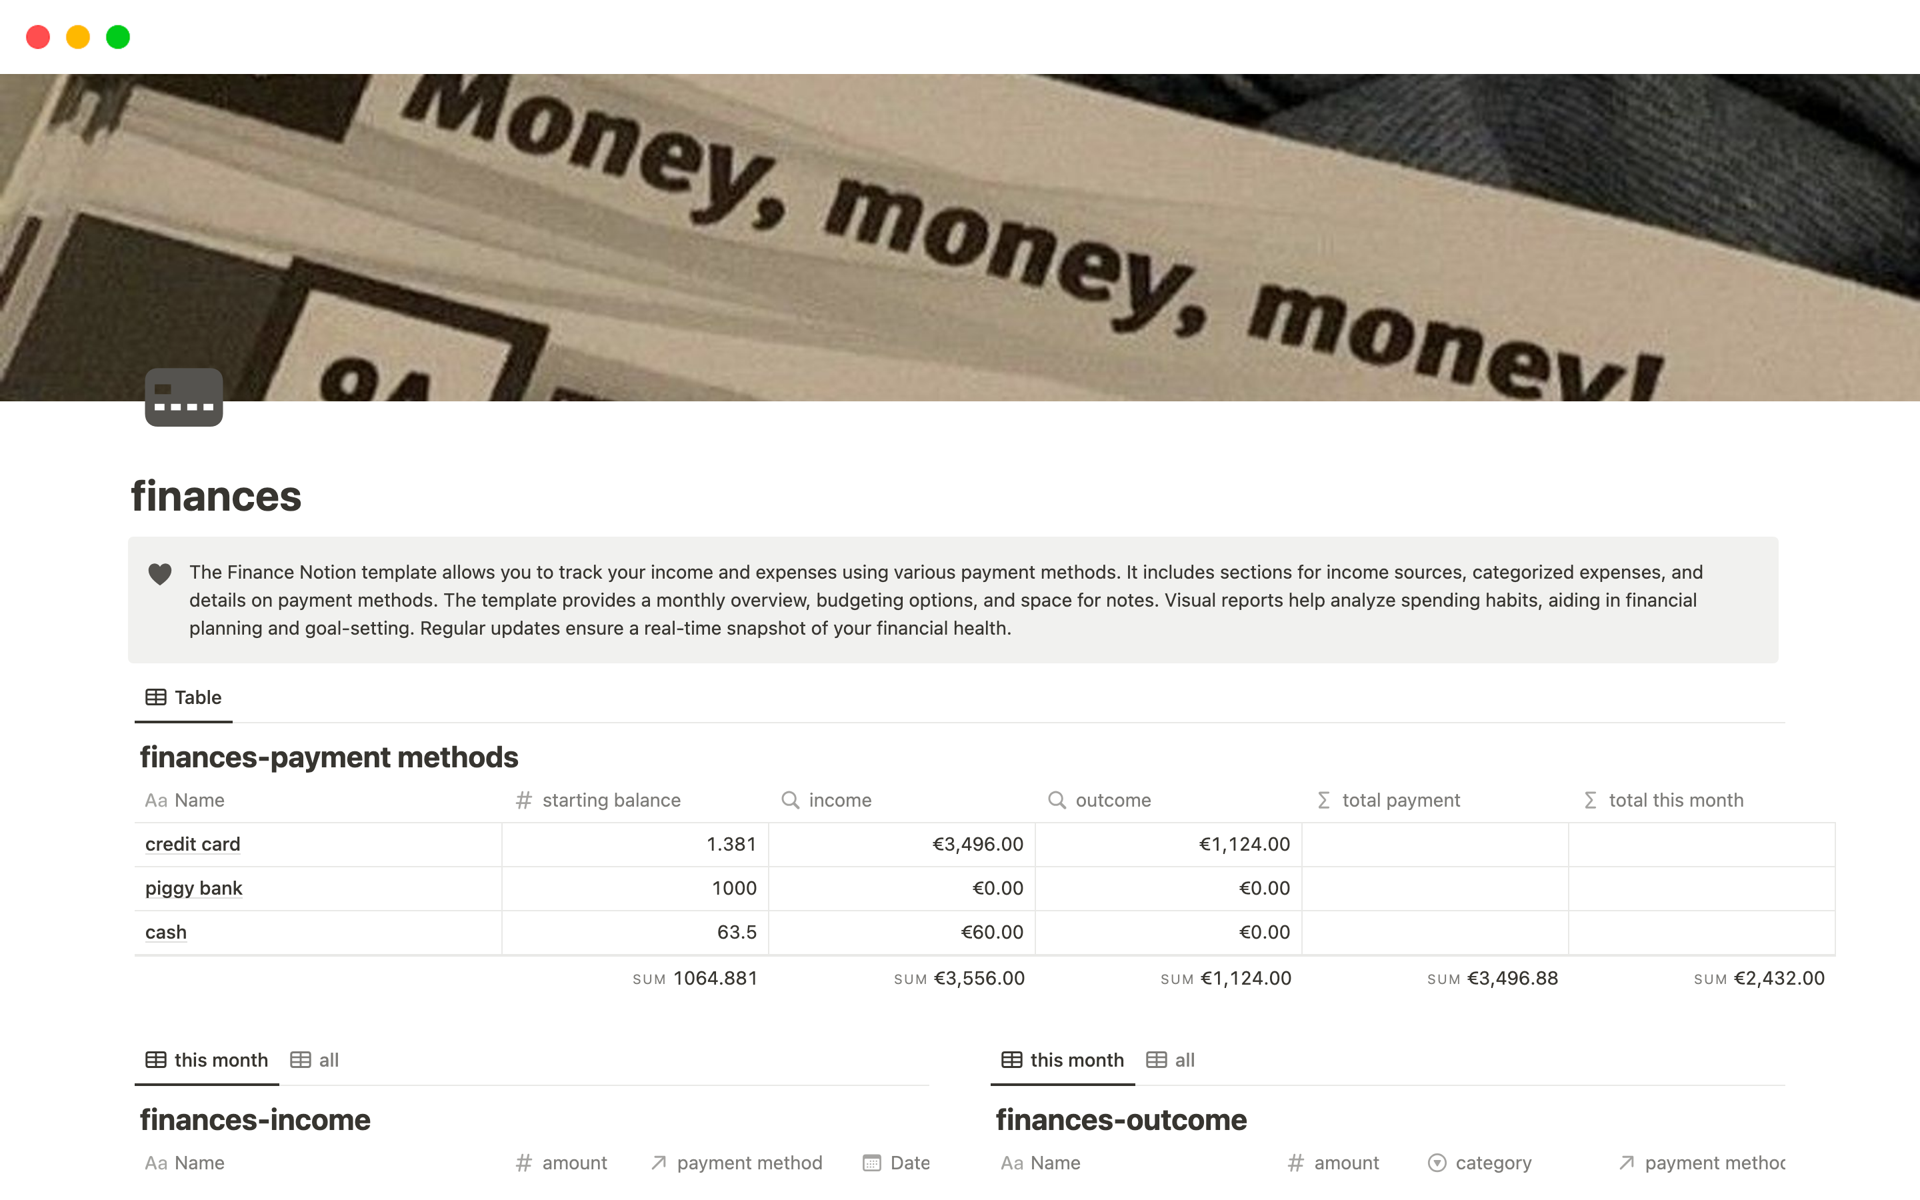 The Finance Notion template simplifies tracking income and expenses, offering detailed sections, budgeting options, and visual reports for effective financial management.